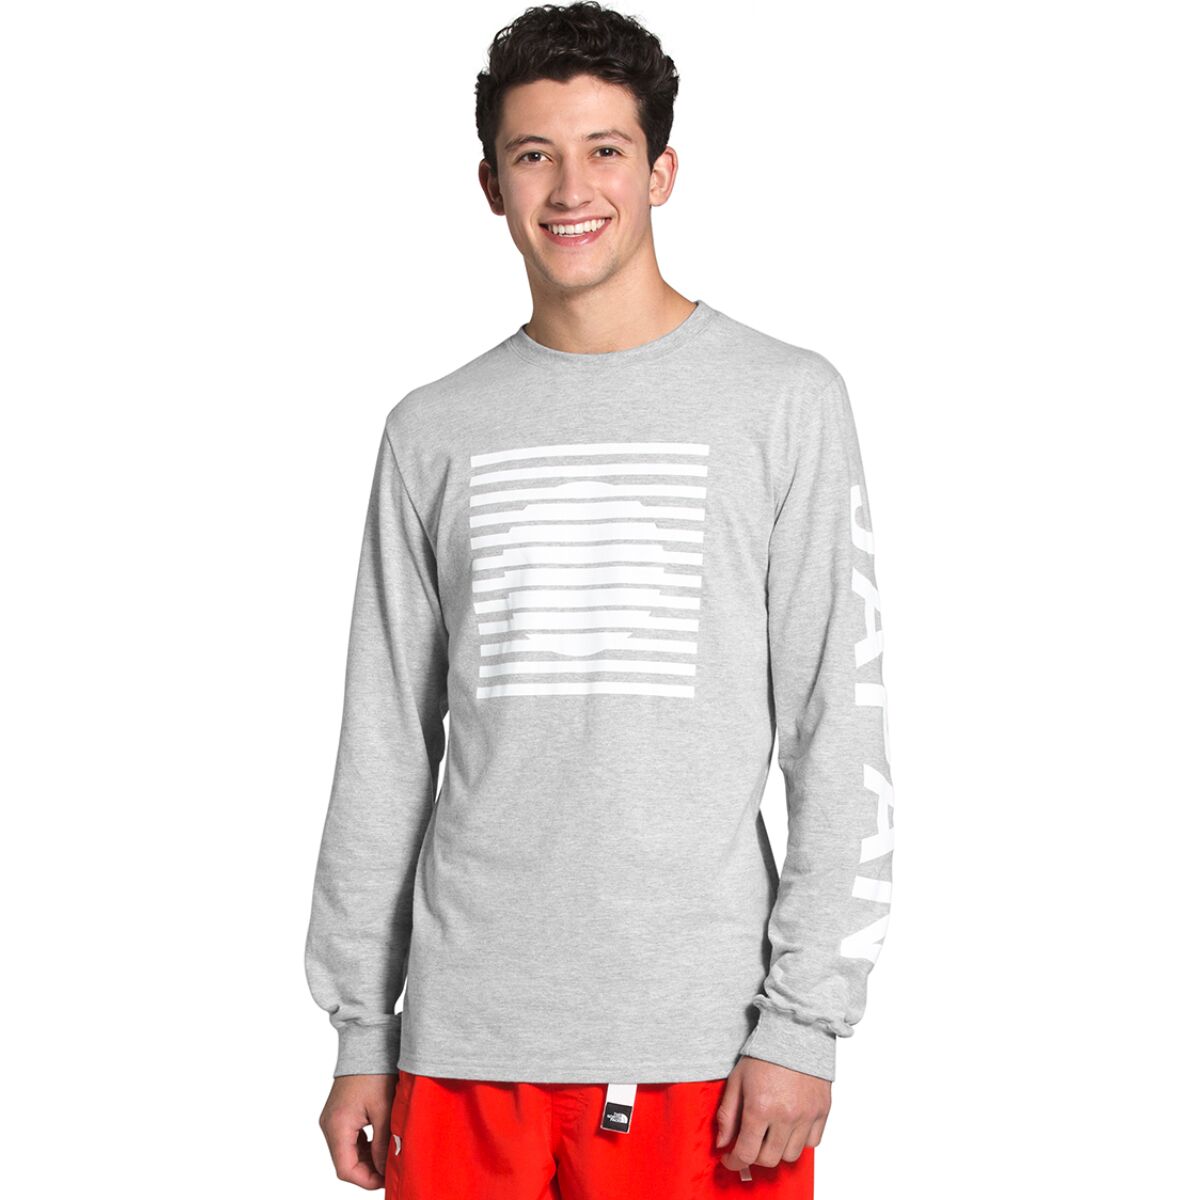 The North Face IC Long-Sleeve T-Shirt - Men's